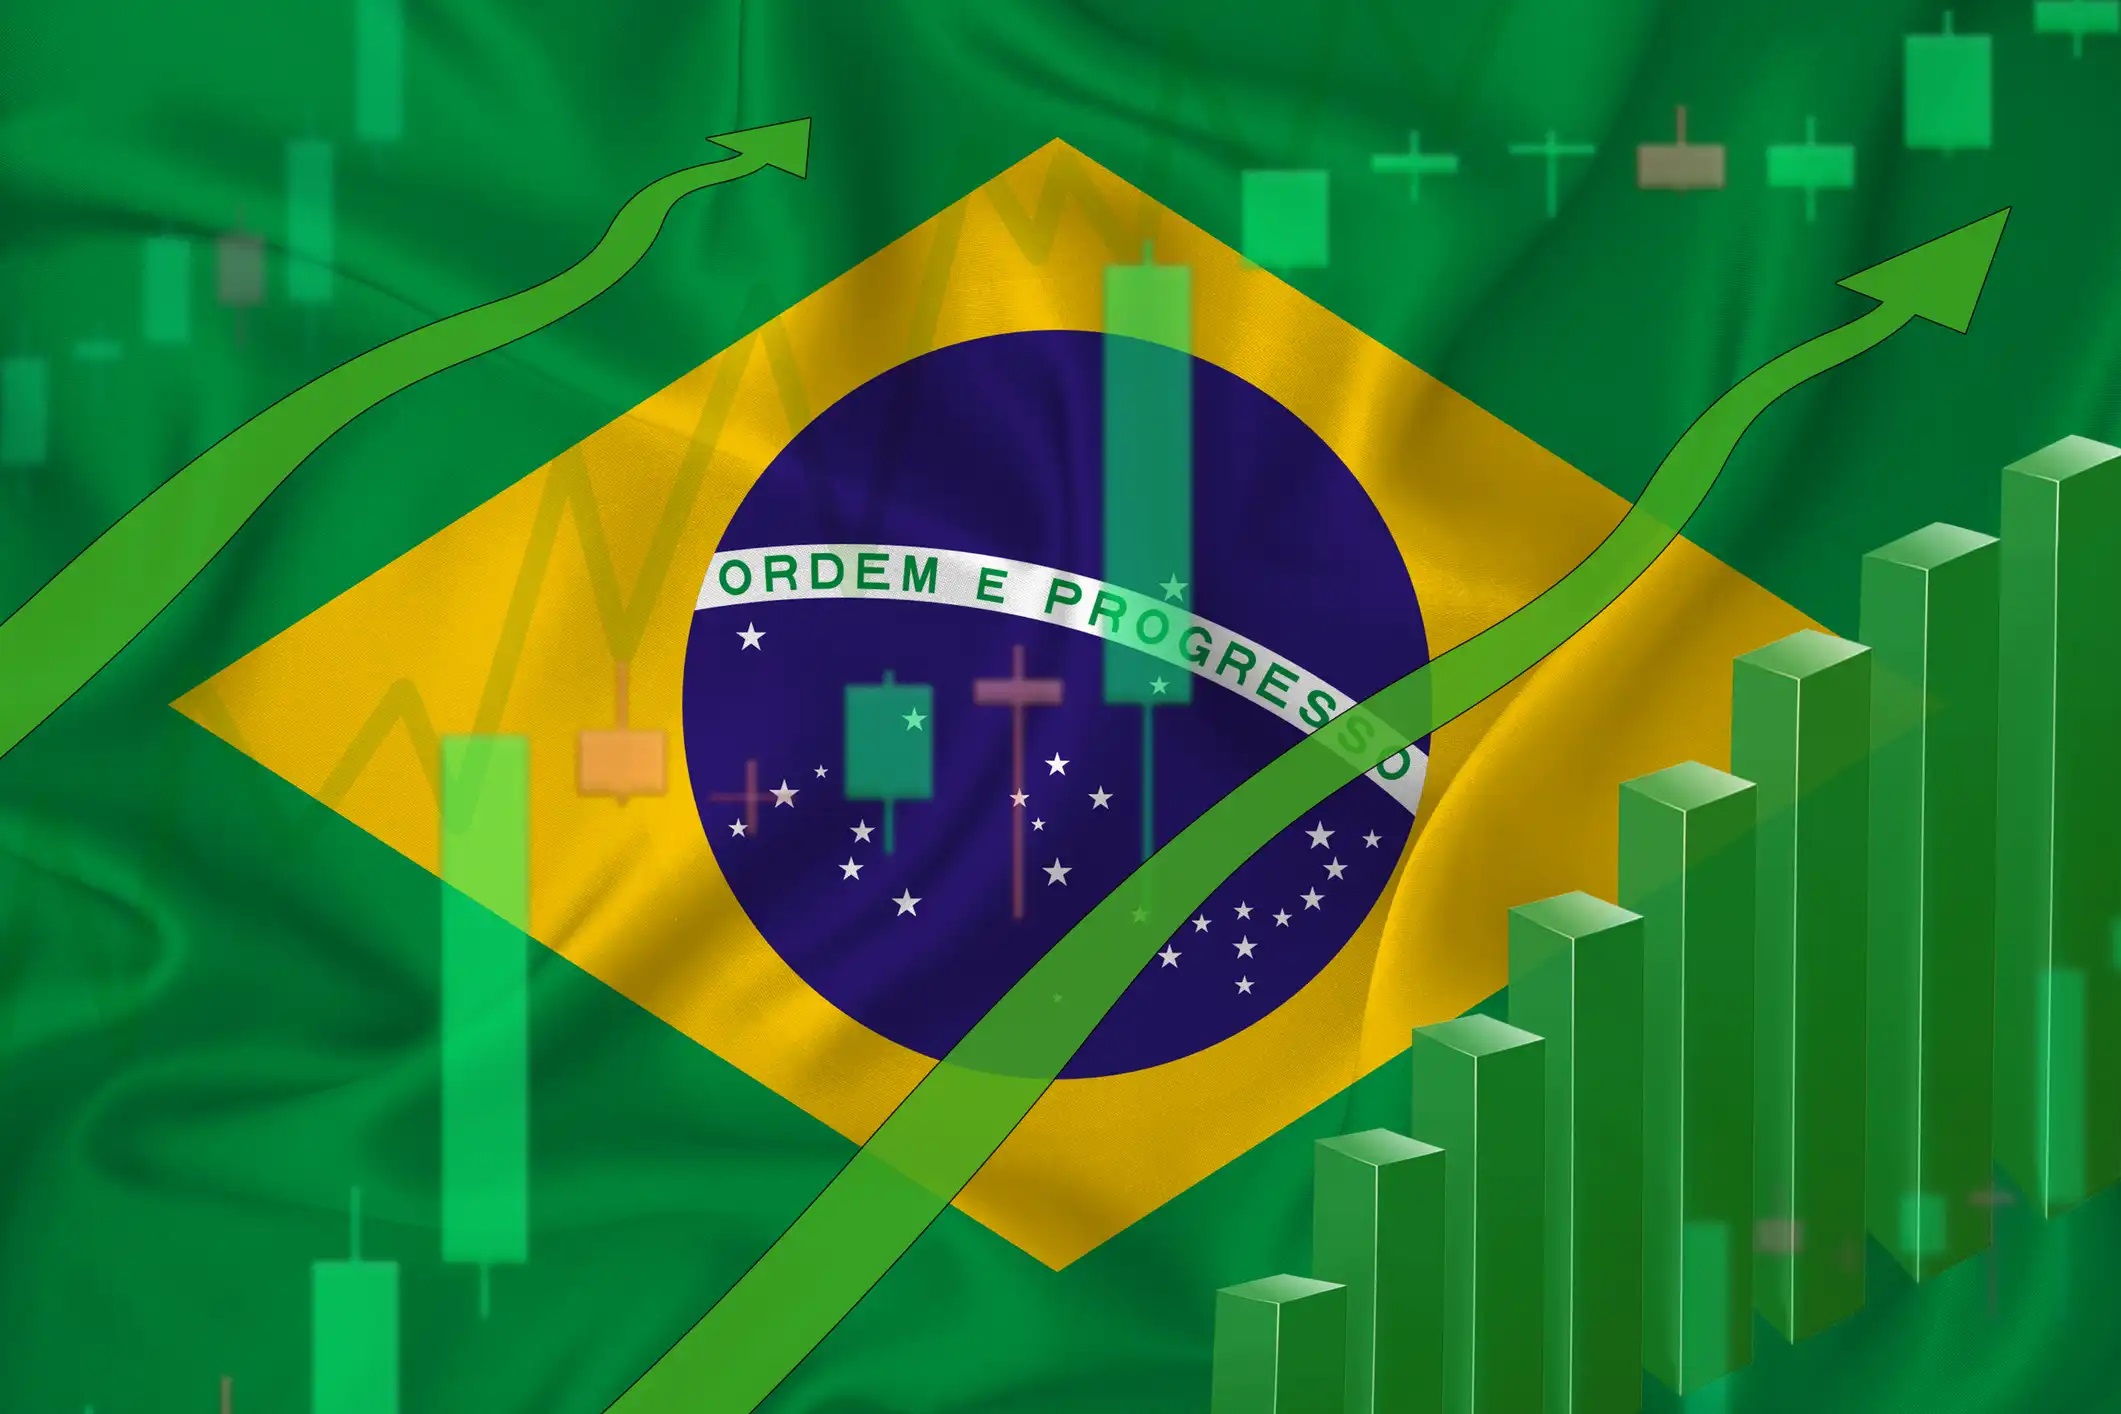 Brazil's GDP growth was 4.6% in 2021: find out which sectors drove the economy and made the employment rate jump